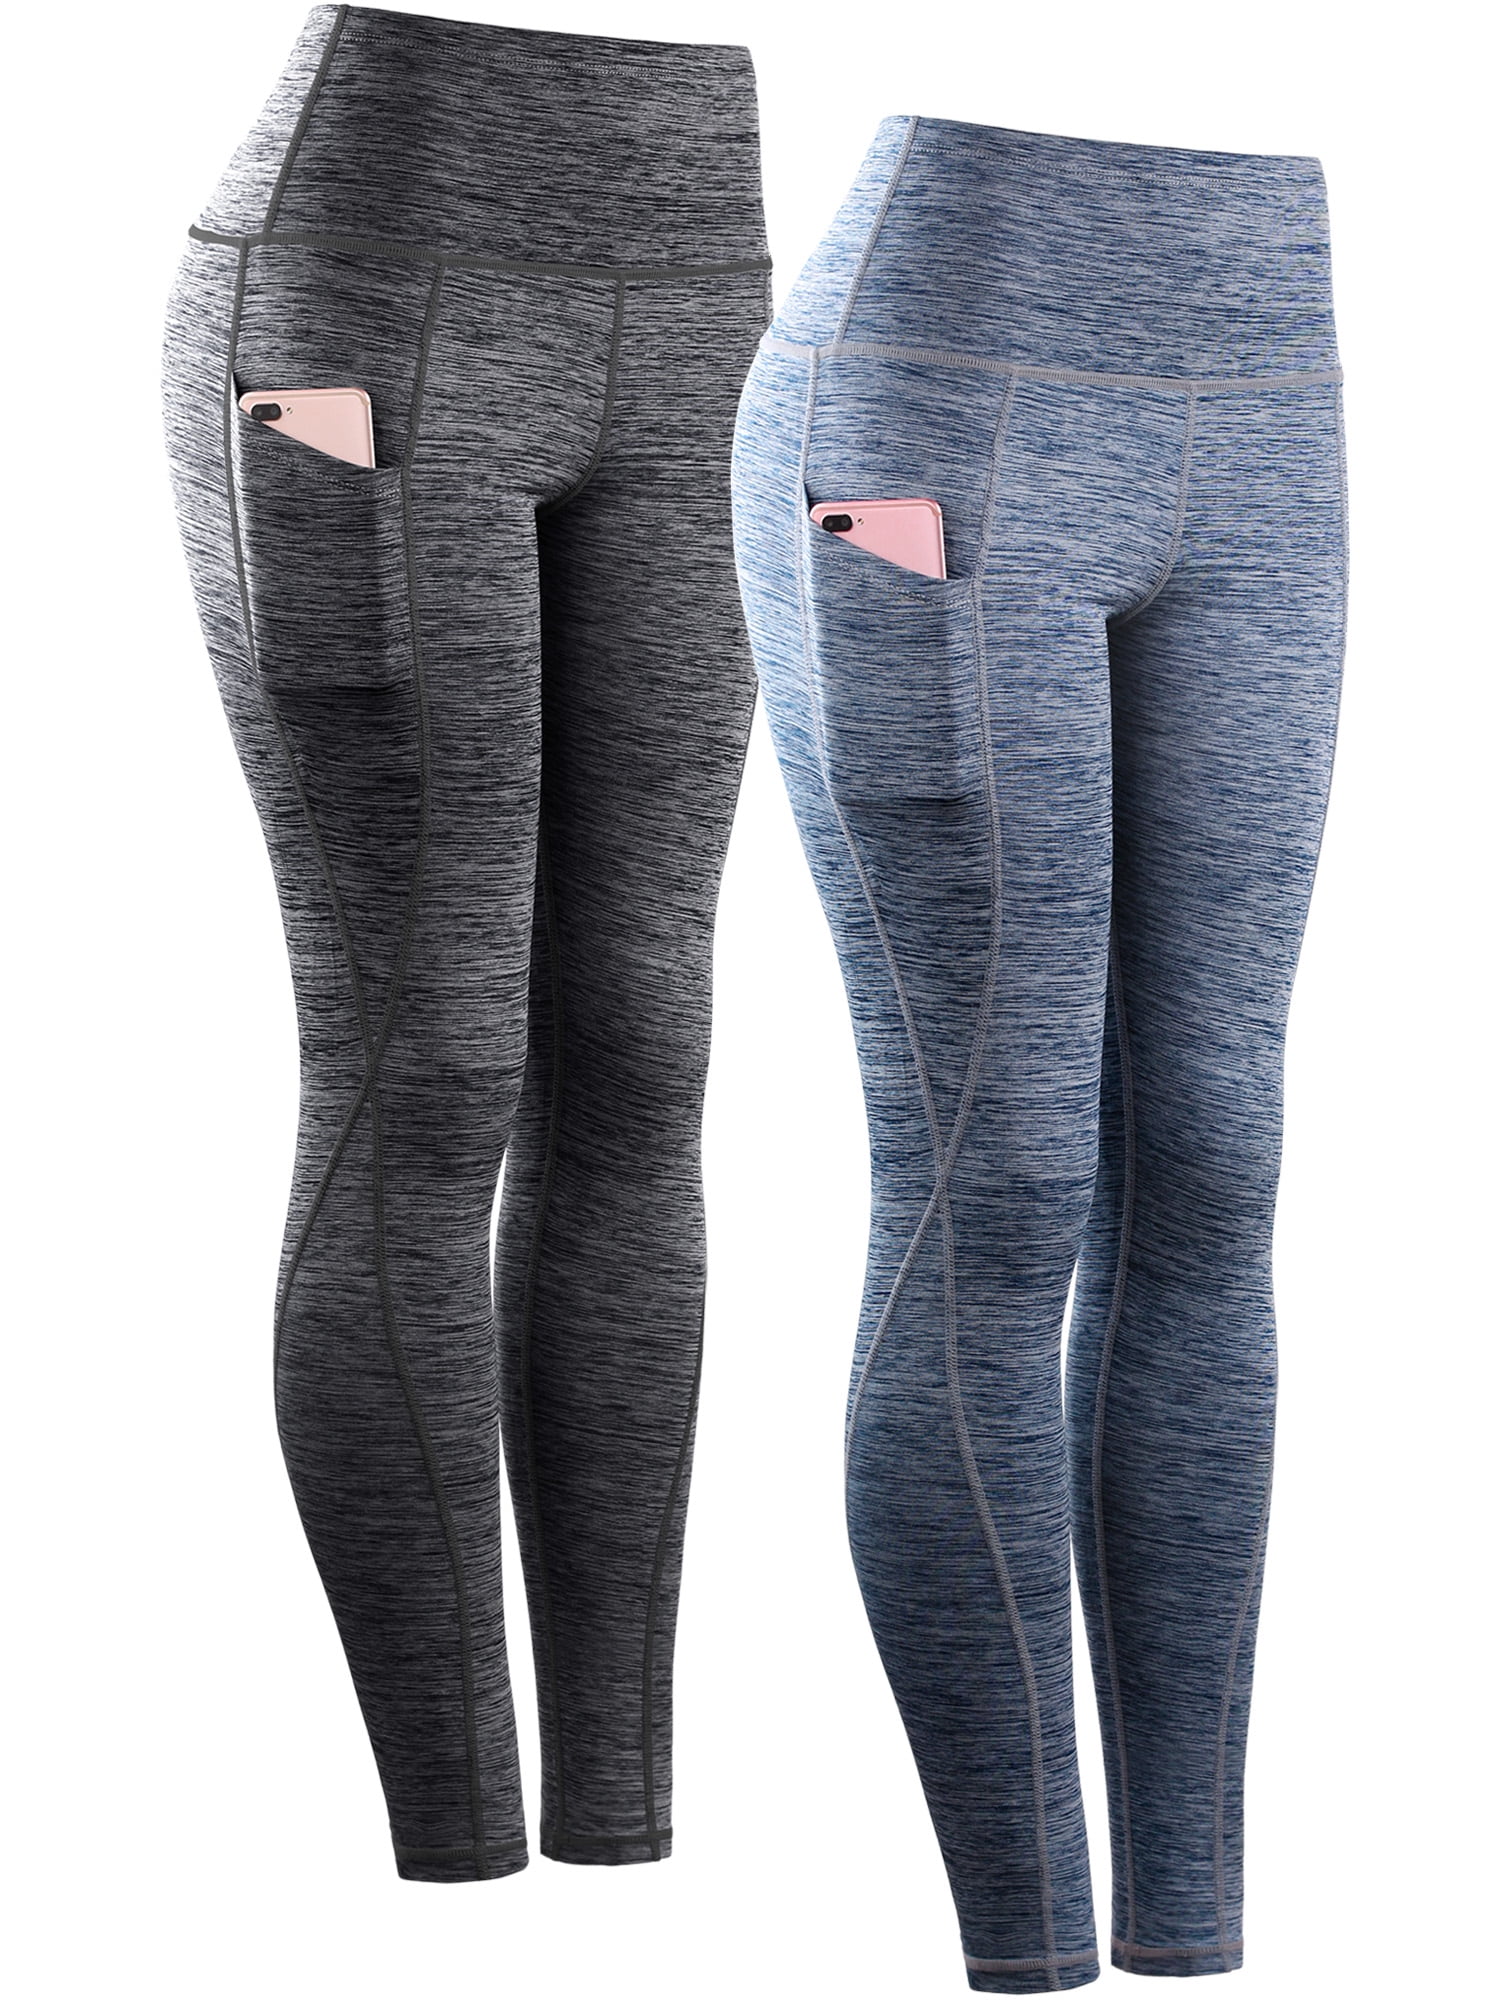 RUUHEE Seamless High Waist Yoga Leggings With Hidden Pockets For Women  Tummy Control, Scrunch Design, And Comfortable Fitness Yoga Pants With  Pockets From Clothingforchoose, $13.04